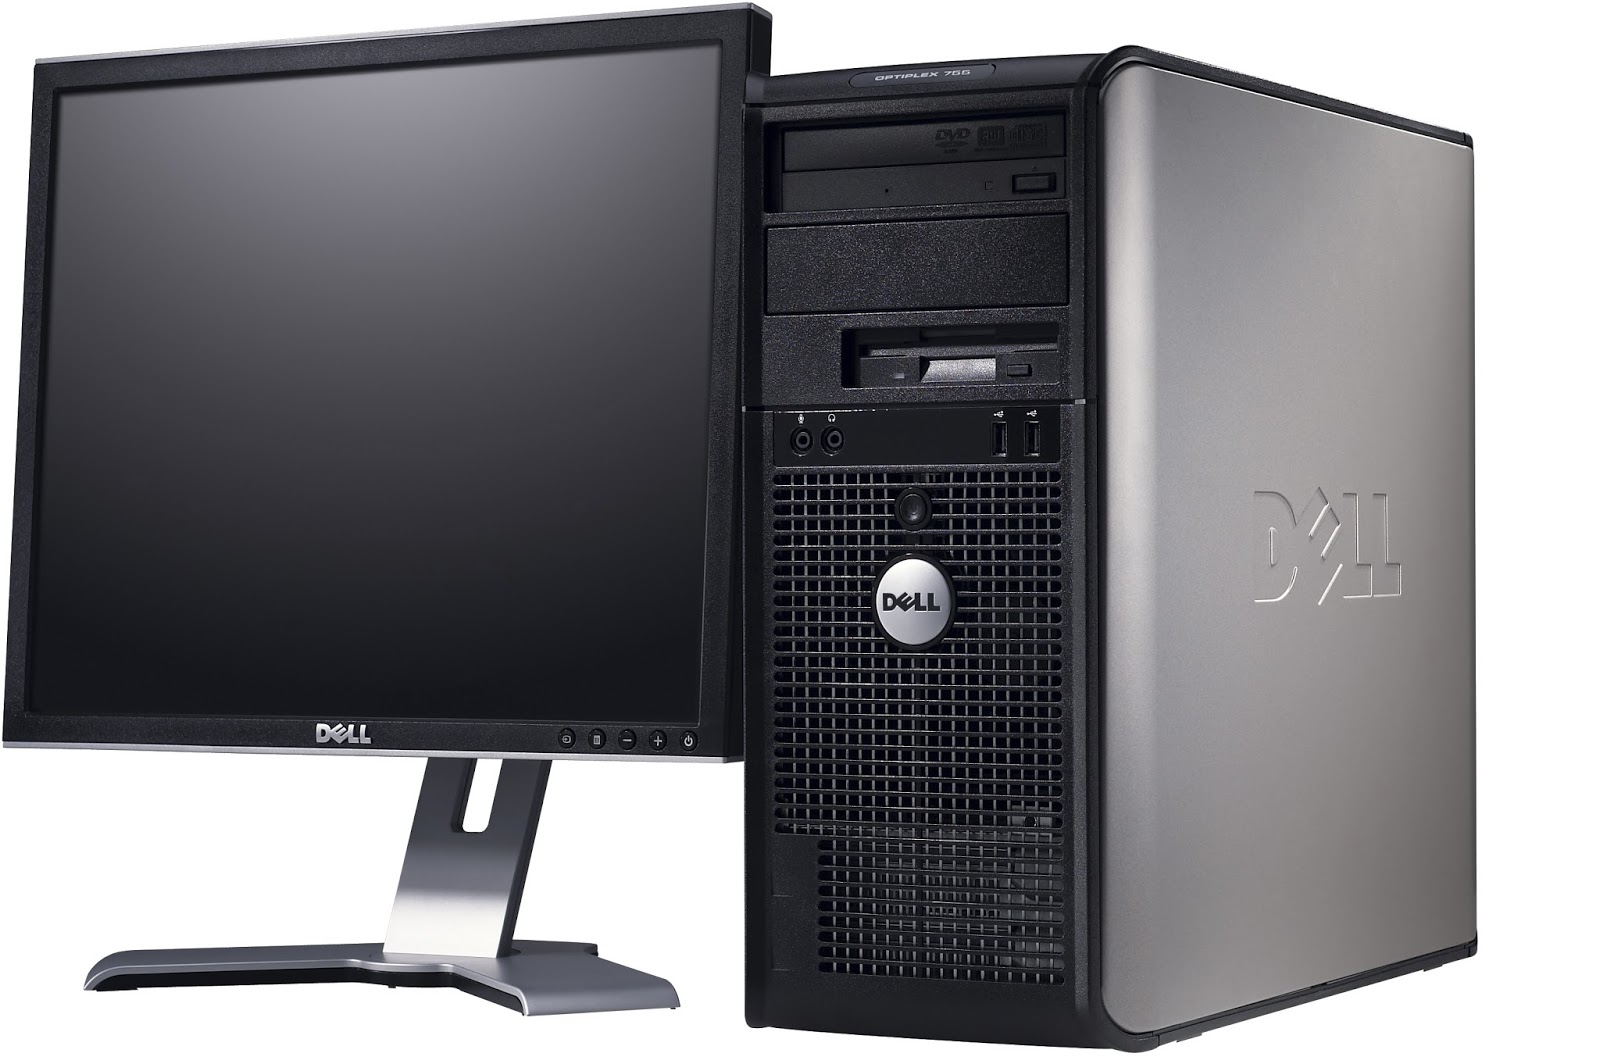 Support for OptiPlex 755 Dell US